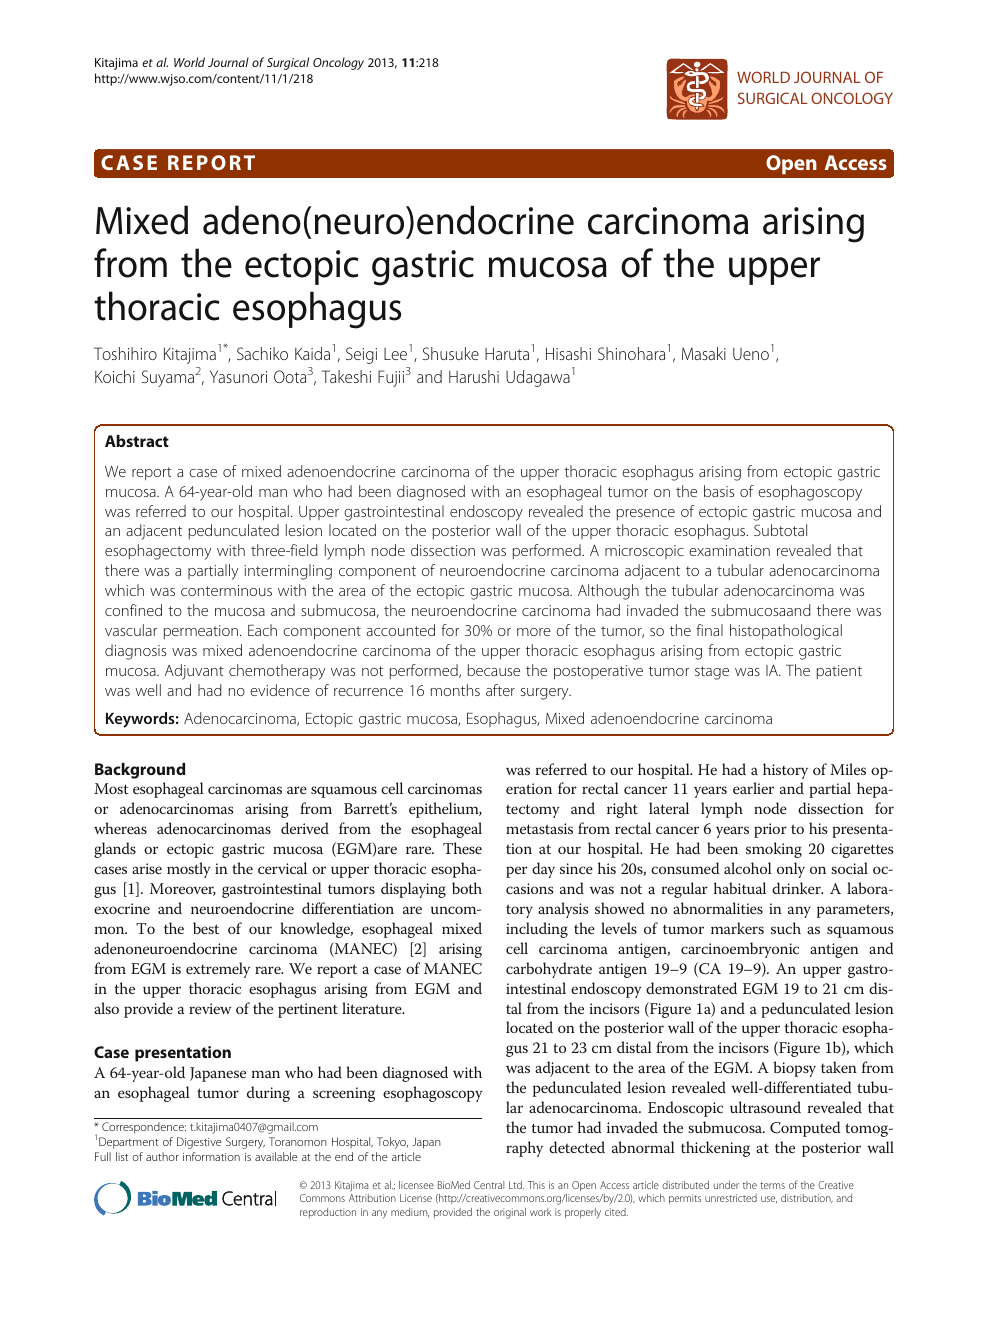 Mixed Adeno Neuro Endocrine Carcinoma Arising From The Ectopic Gastric Mucosa Of The Upper Thoracic Esophagus Topic Of Research Paper In Clinical Medicine Download Scholarly Article Pdf And Read For Free On Cyberleninka